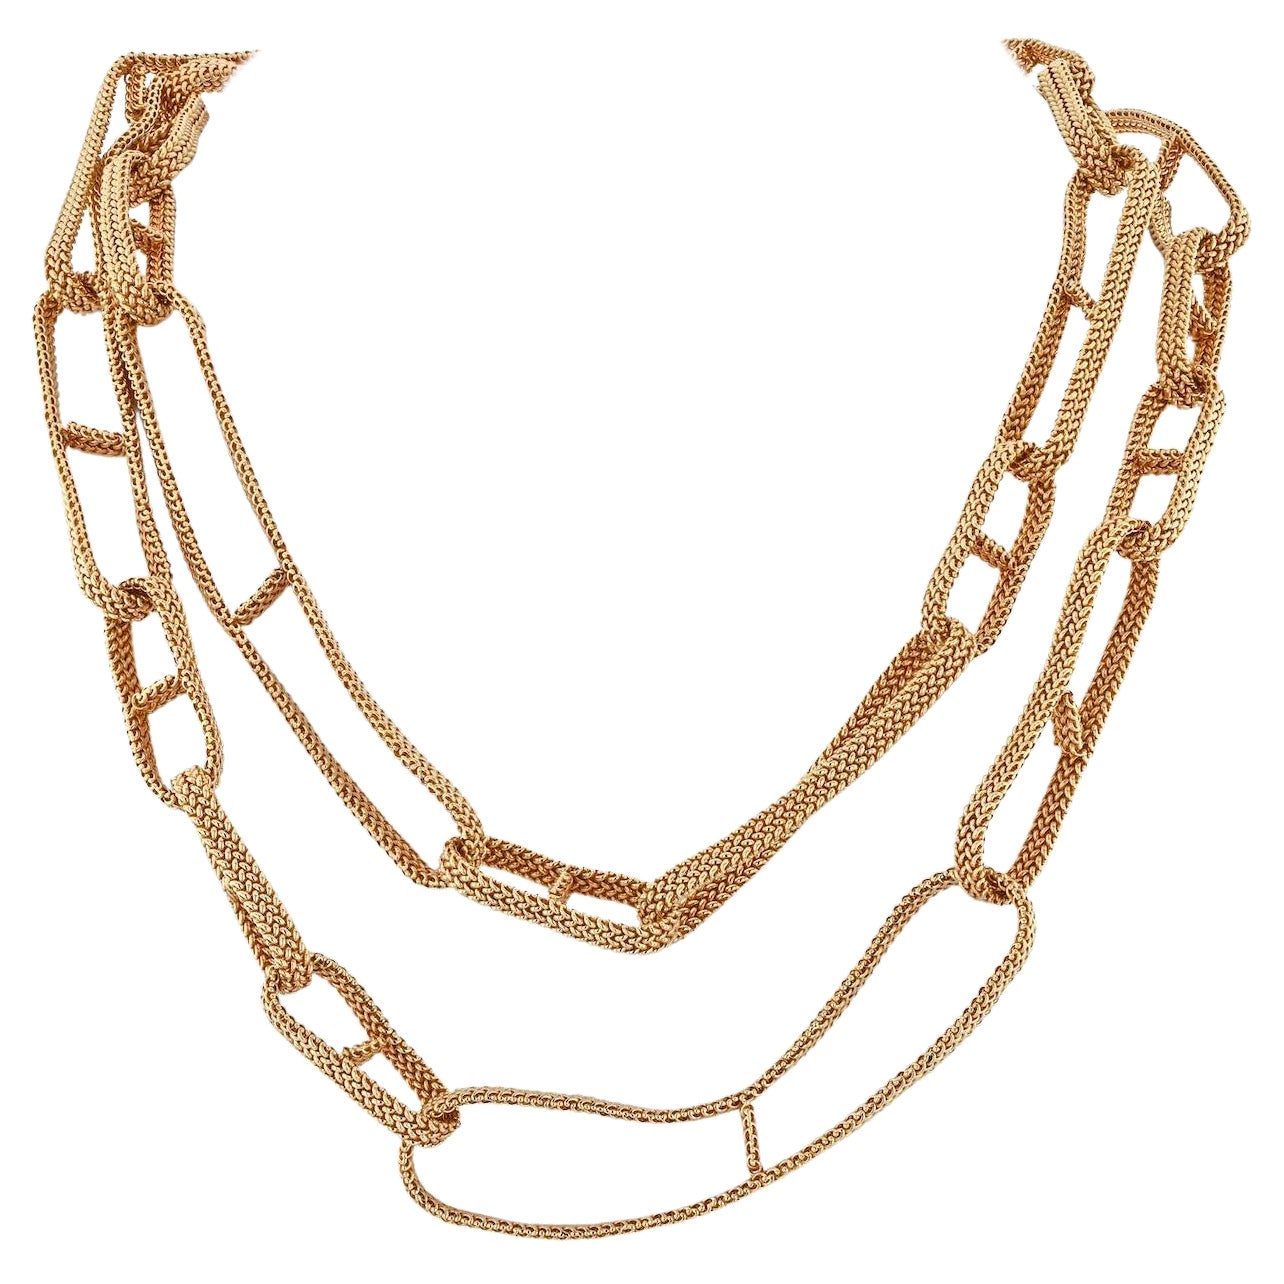 Hermès 18K Yellow Gold Chaine D'ancre Extra Large Link Chain Necklace